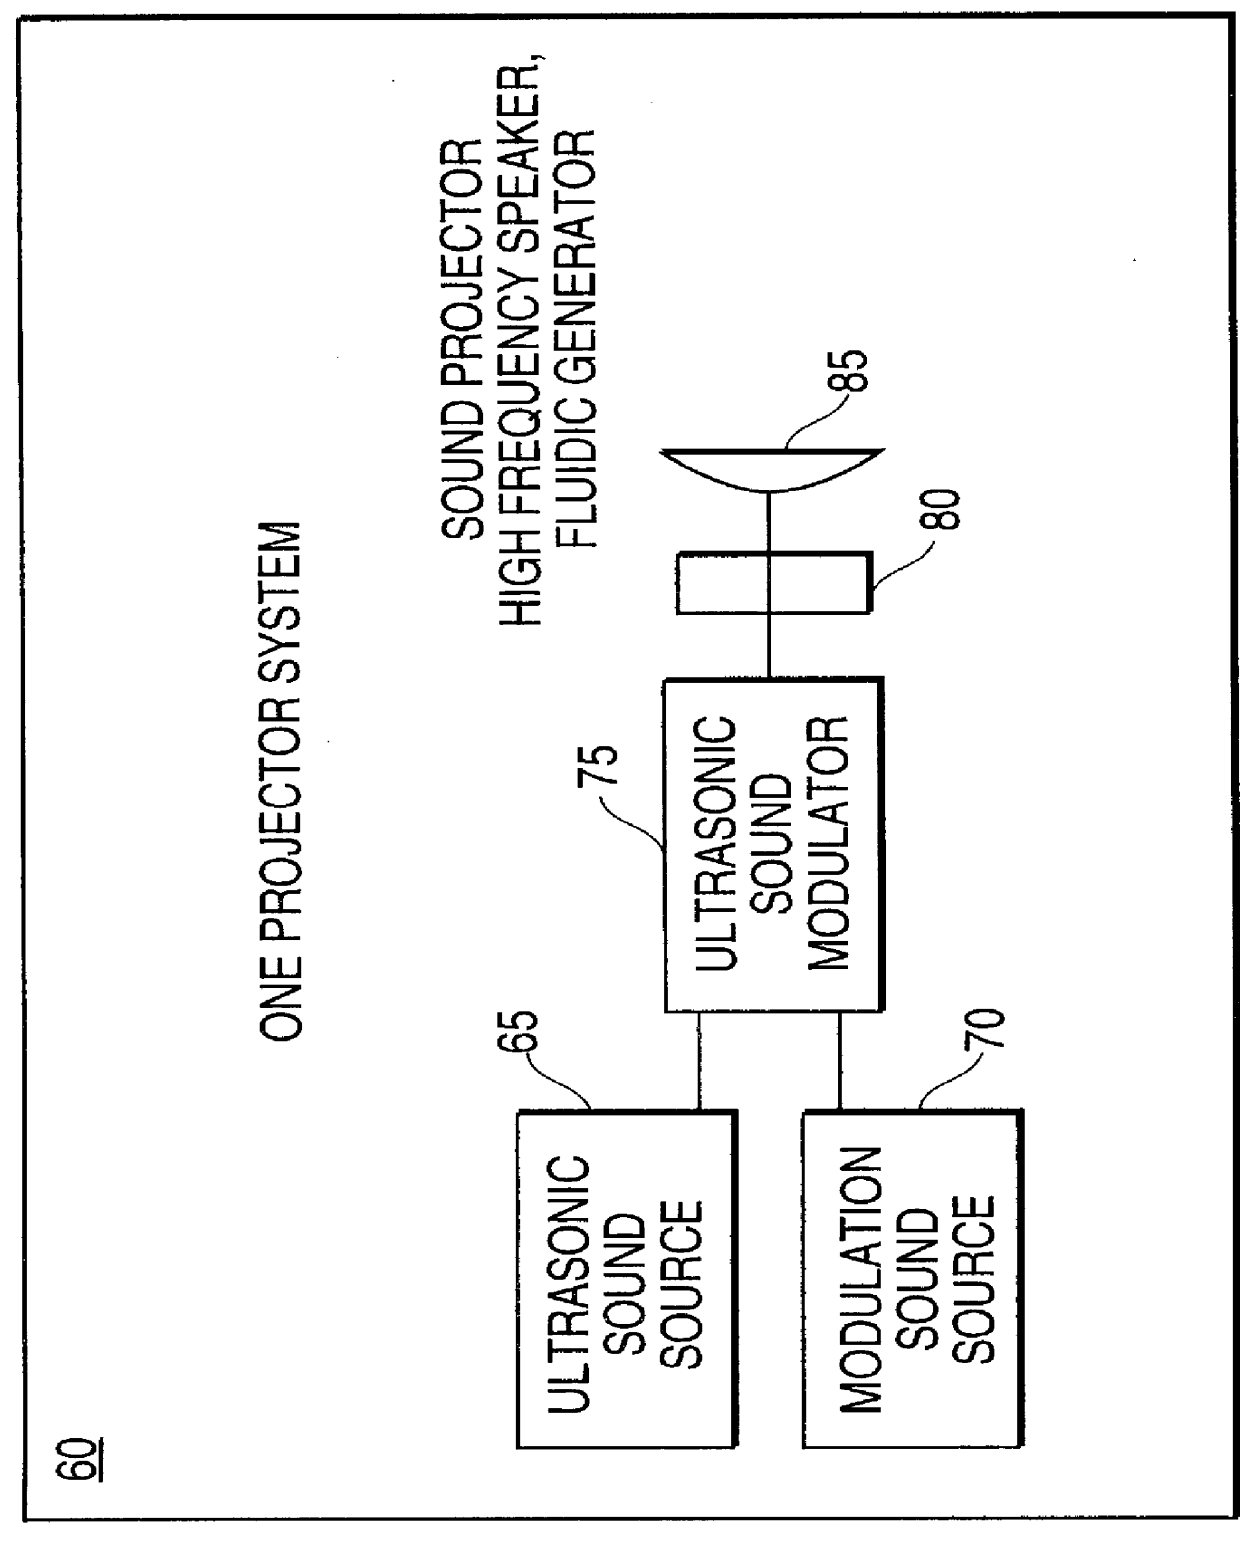 Apparatus and method of broadcasting audible sound using ultrasonic sound as a carrier